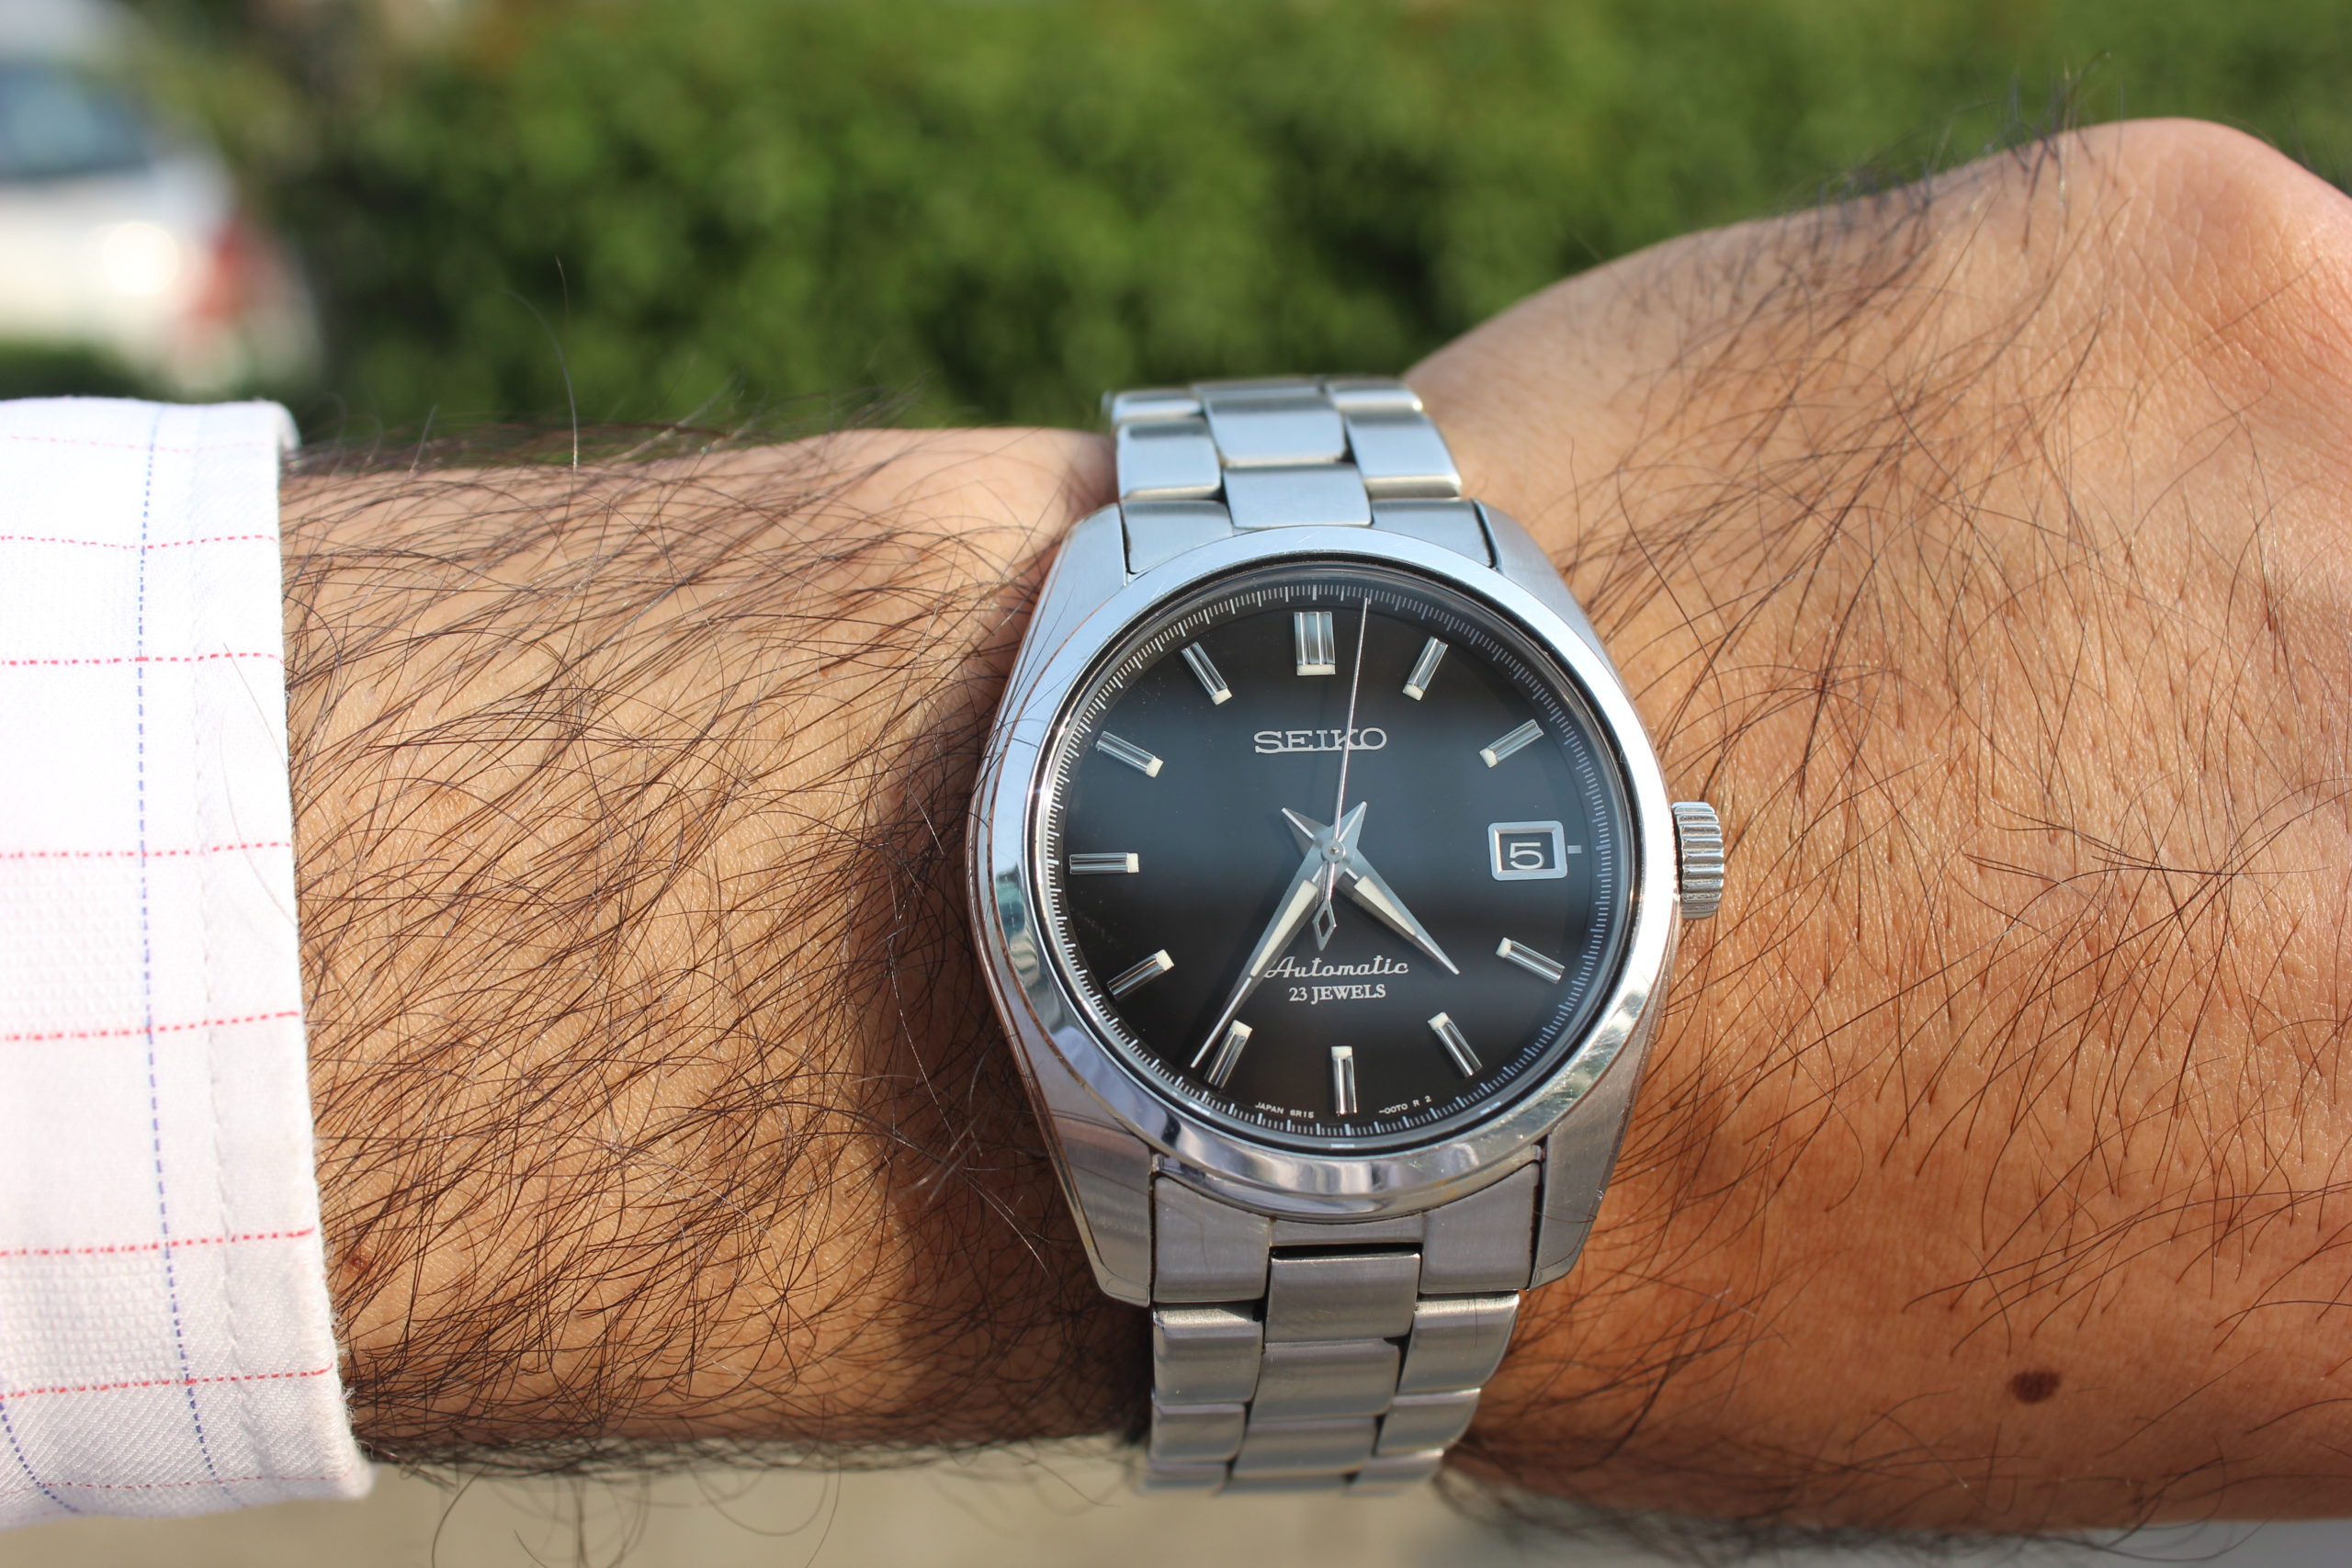 Seiko SARB033 Automatic Watch Review – WristReview.com – Featuring Watch  Reviews, Critiques, Reports & News